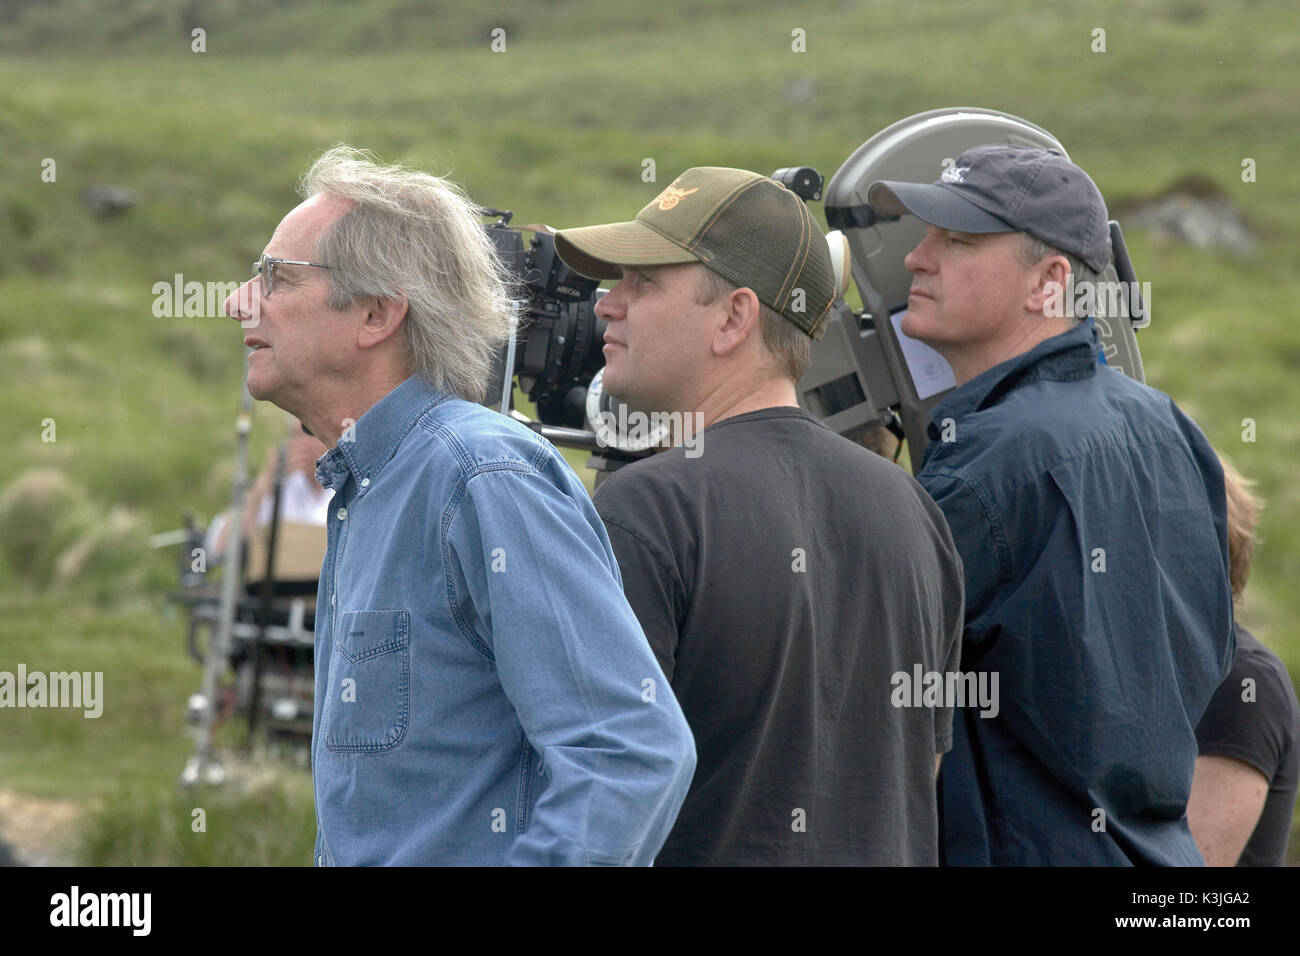 THE WIND THAT SHAKES THE BARLEY Director KEN LOACH, Focus Puller CARL HUDSON, Cinematographer BARRY ACKROYD THE WIND THAT SHAKES THE BARLEY      Date: 2006 Stock Photo